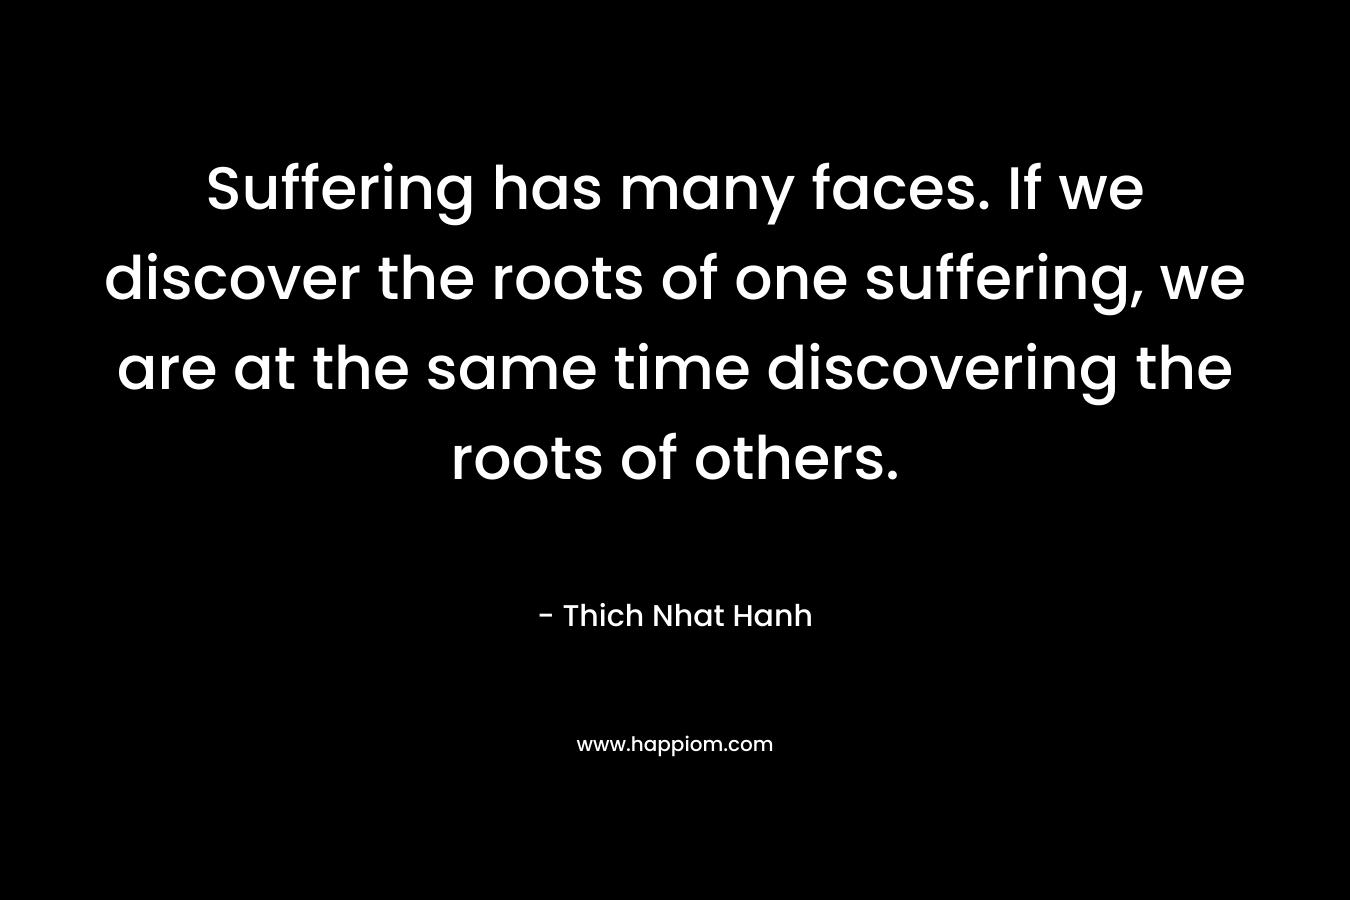 Suffering has many faces. If we discover the roots of one suffering, we are at the same time discovering the roots of others. – Thich Nhat Hanh